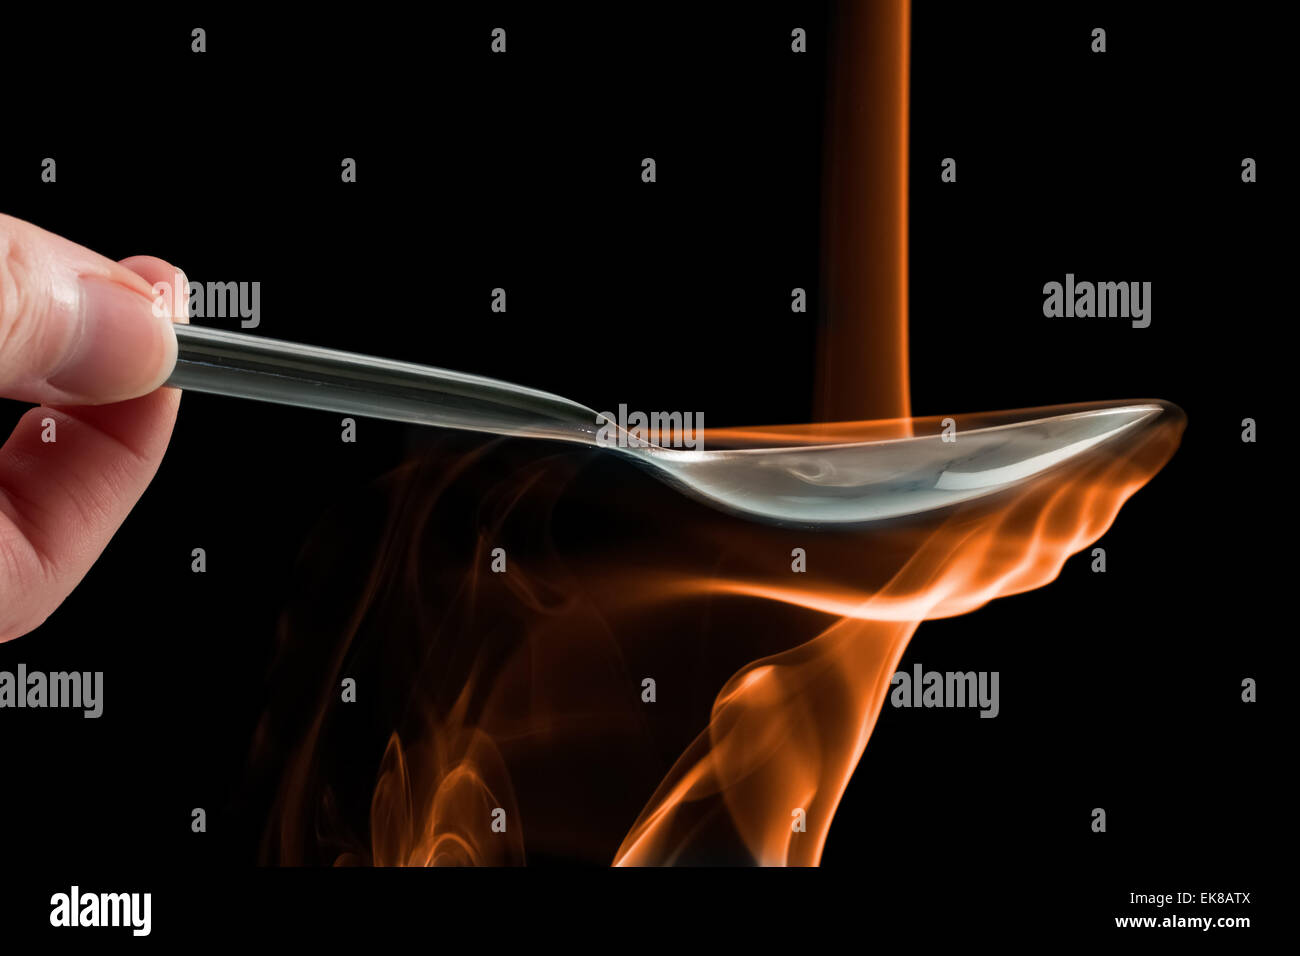 Smoke made to look like fire pouring on a spoon over a black background. Stock Photo